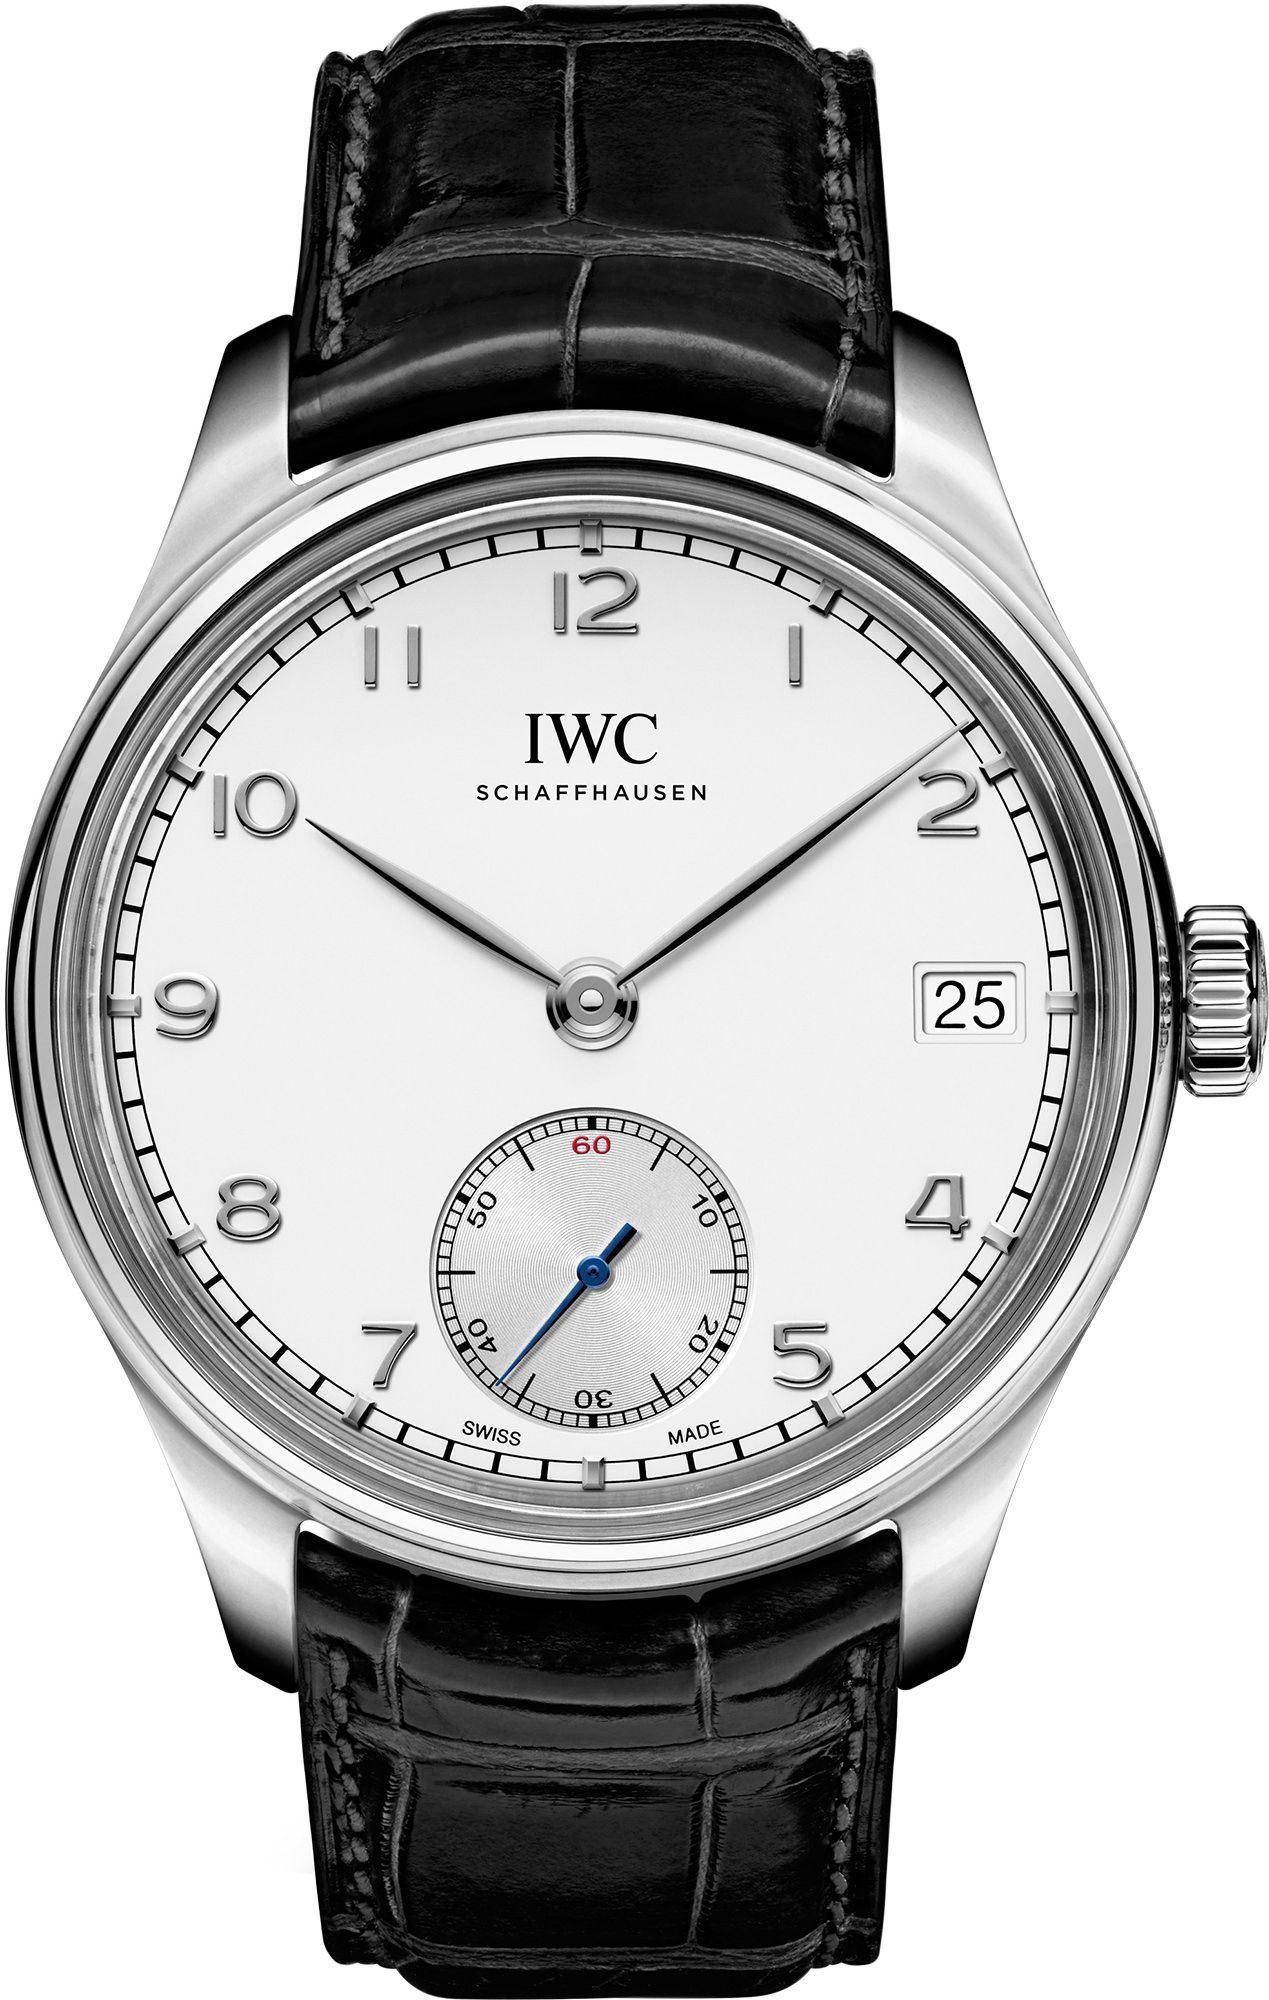 IWC Hand-Wound 8 Days 43 mm Watch in Silver Dial For Men - 1